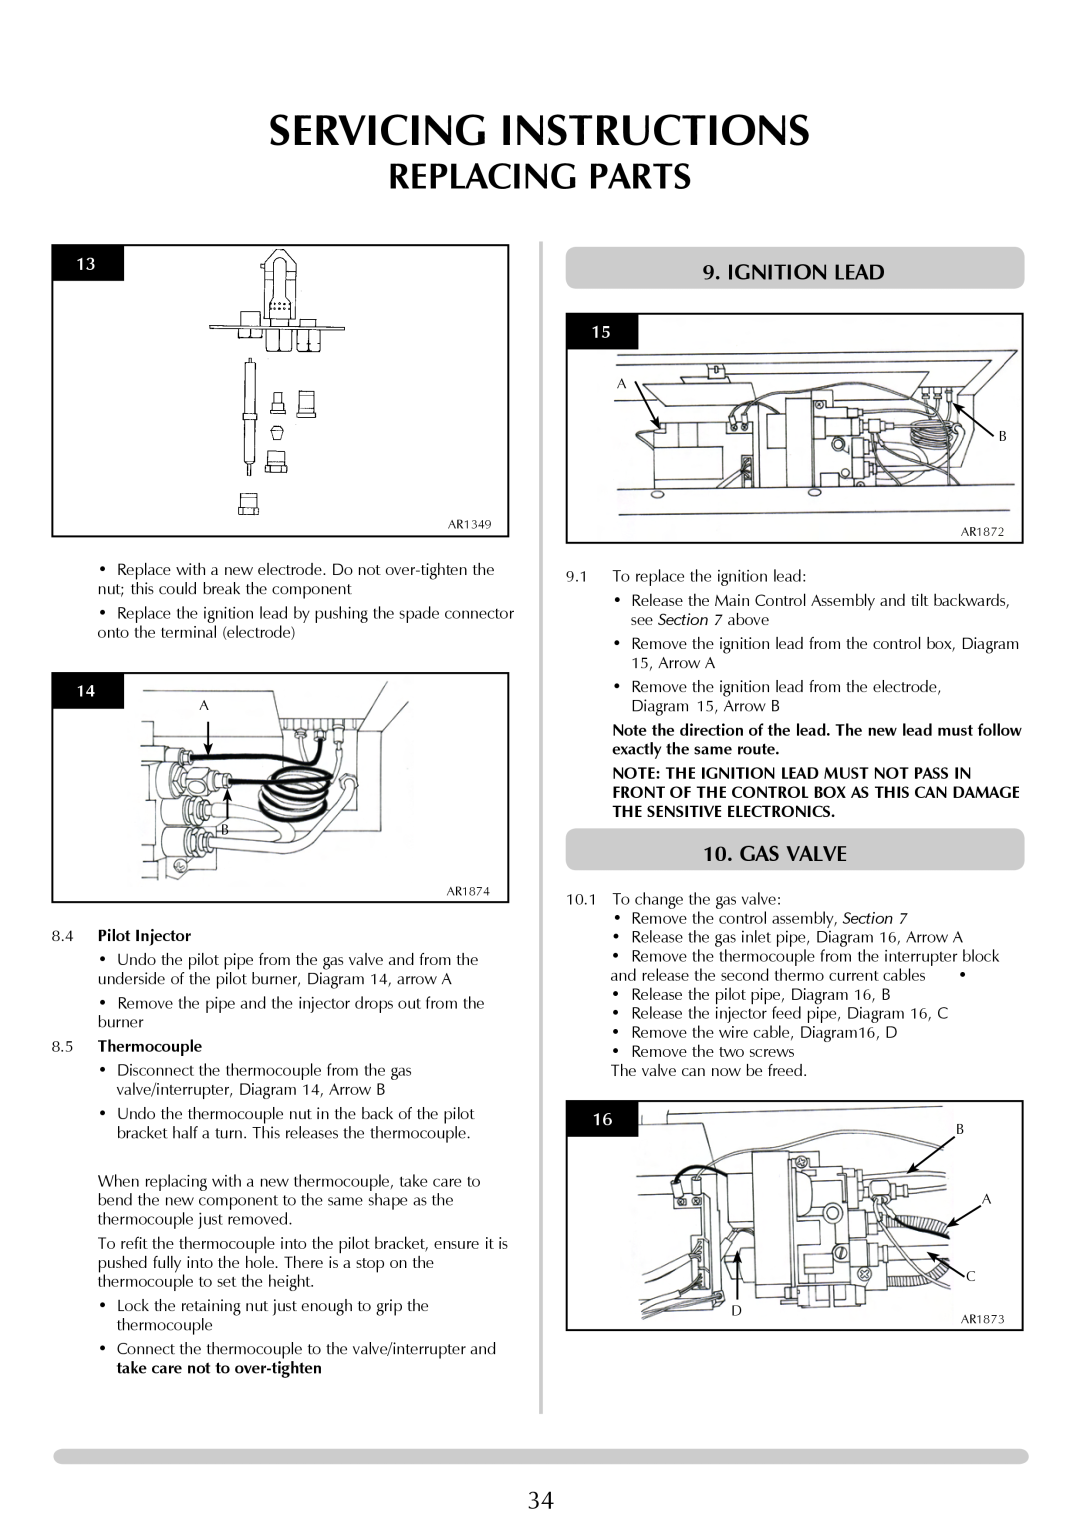 Stovax Studio 22 Ignition Lead, Gas Valve, Servicing Instructions, Replacing Parts, 8.4Pilot Injector, 8.5Thermocouple 